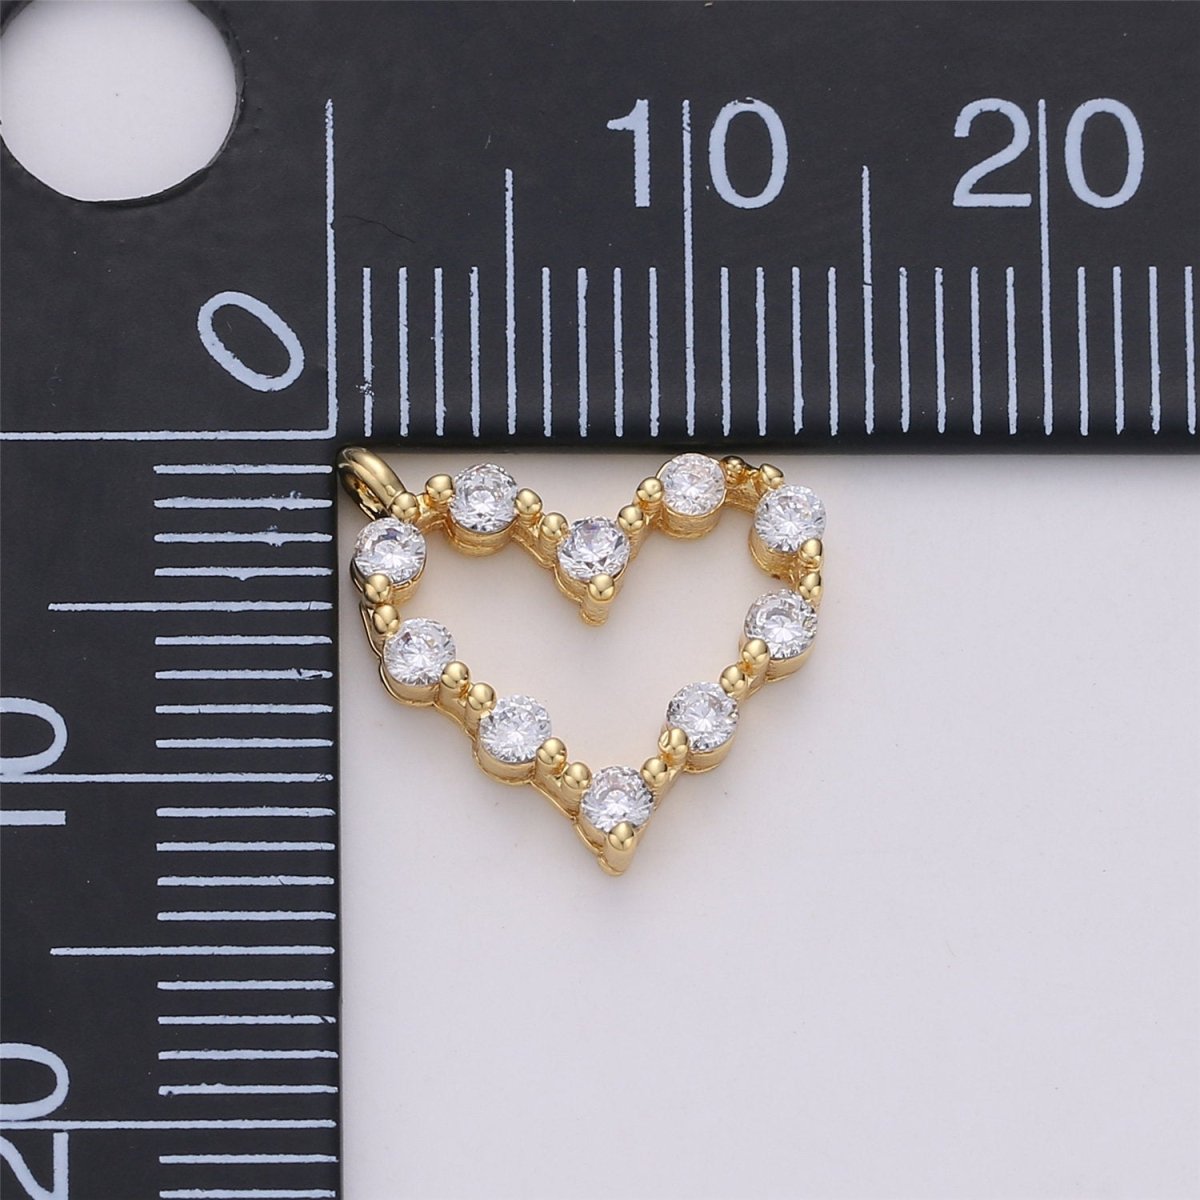 24K Gold Filled Dainty Cute Heart Charm with Love Micro Pave Cubic Zirconia CZ Stone for Necklace or Bracelet, C-887 - DLUXCA